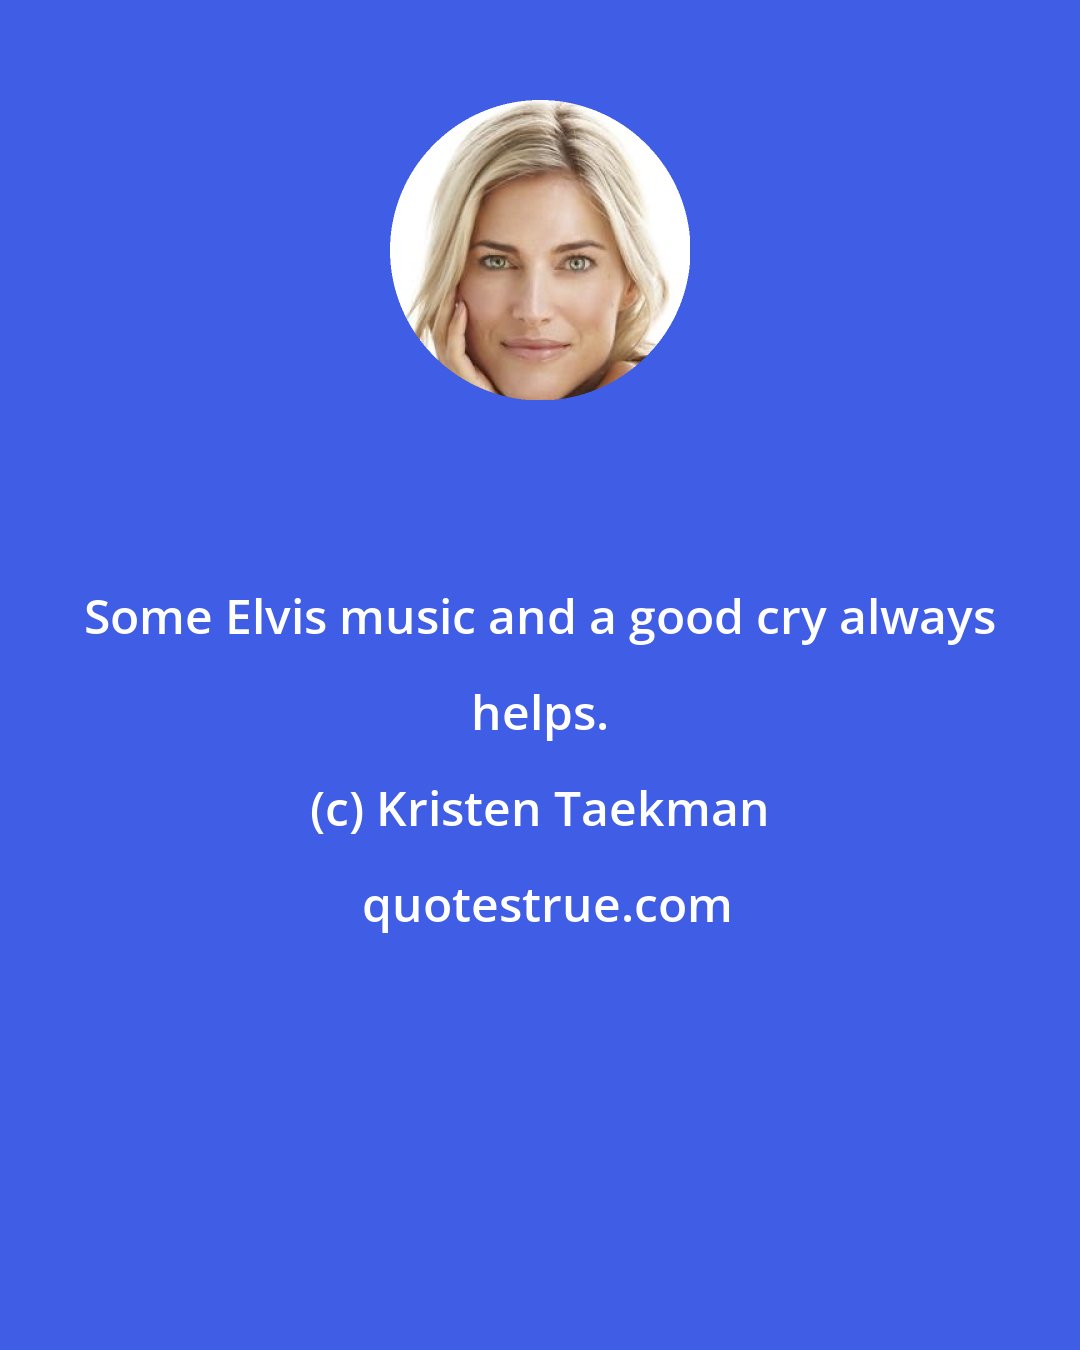 Kristen Taekman: Some Elvis music and a good cry always helps.